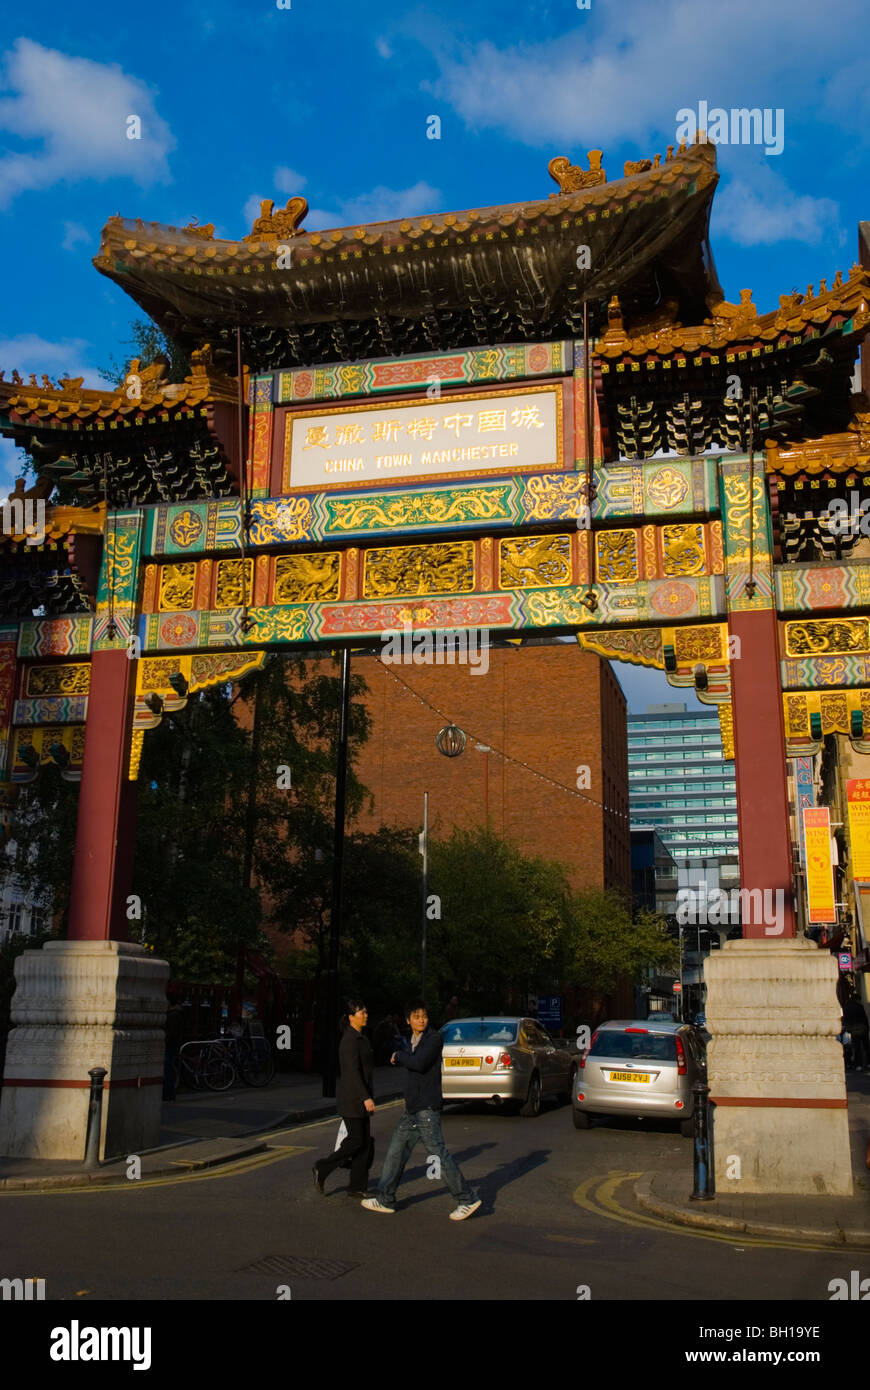 Chinese Arch Chinatown central Manchester England UK Europe Stock Photo